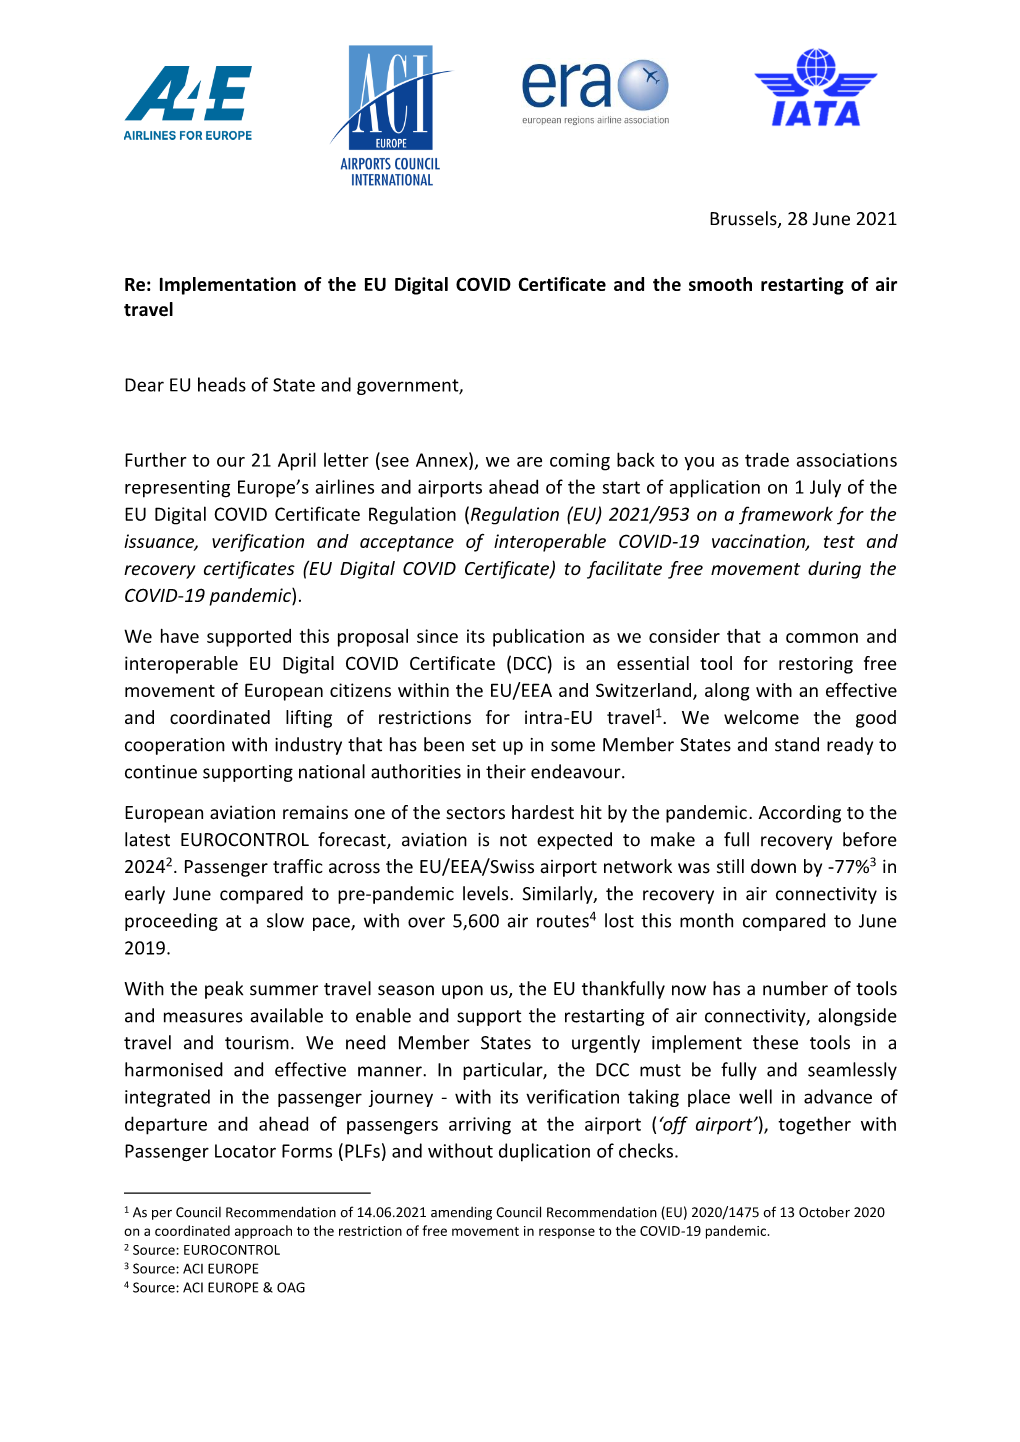 Brussels, 28 June 2021 Re: Implementation of the EU Digital COVID Certificate and the Smooth Restarting of Air Travel Dear EU He